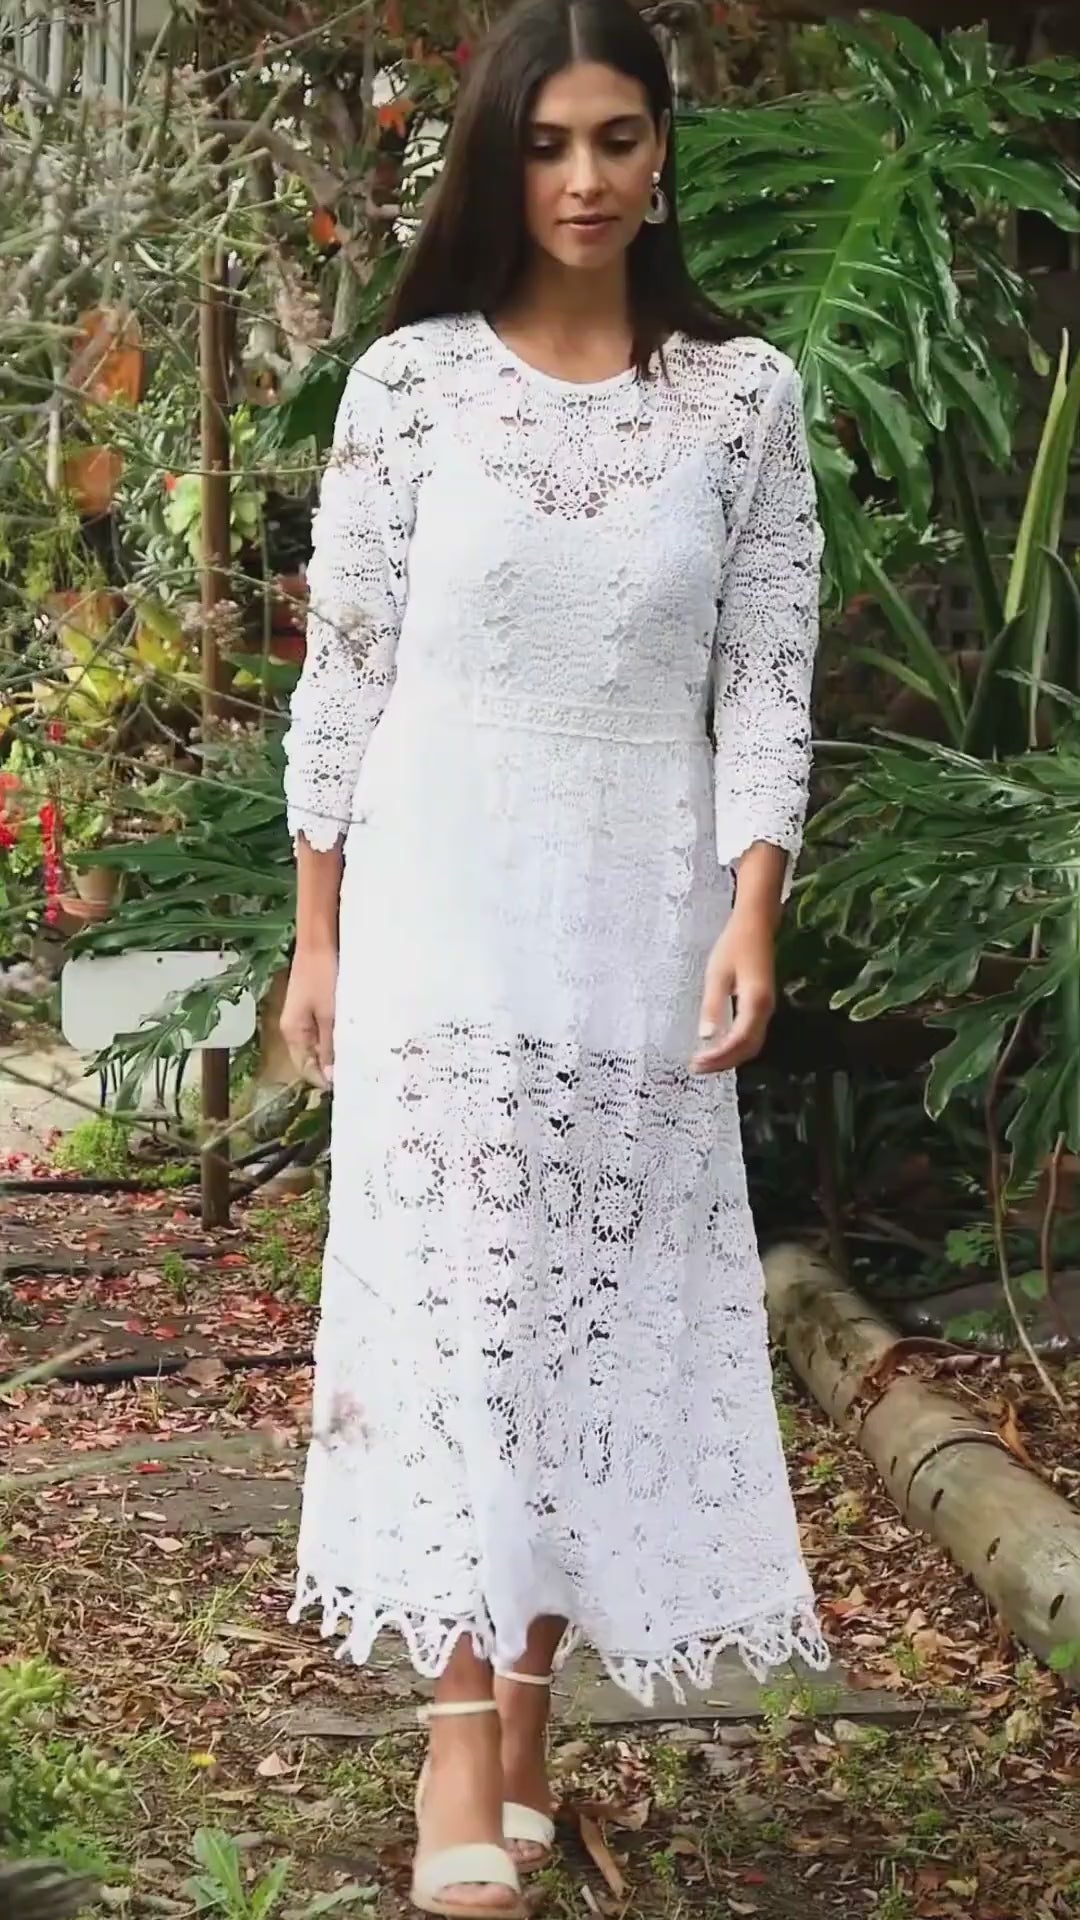 Video. A maxi dress with a classic silhouette, long sleeves, and a comfortable elastic waistband. Stitched together by hand using individual vintage doily lace pieces. Throw it over a white slip and a pair of open-toe heels for a stroll out on the town at your favorite beach destination. Color: White